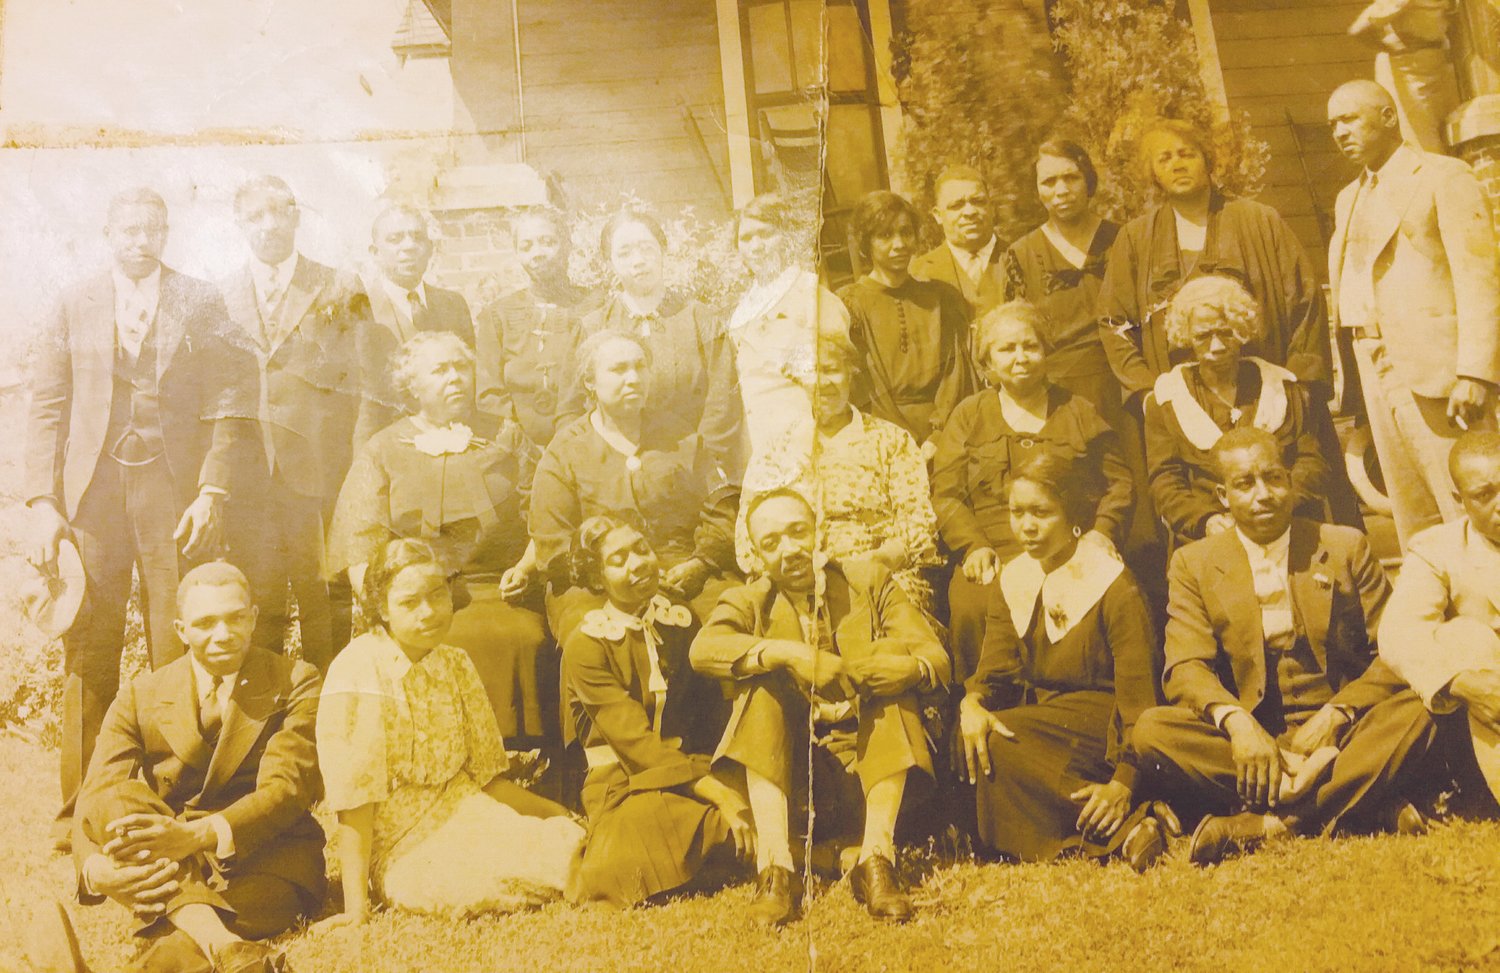 A Taylor family photo discovered by Antonio Austin as a part of his genealogical research.